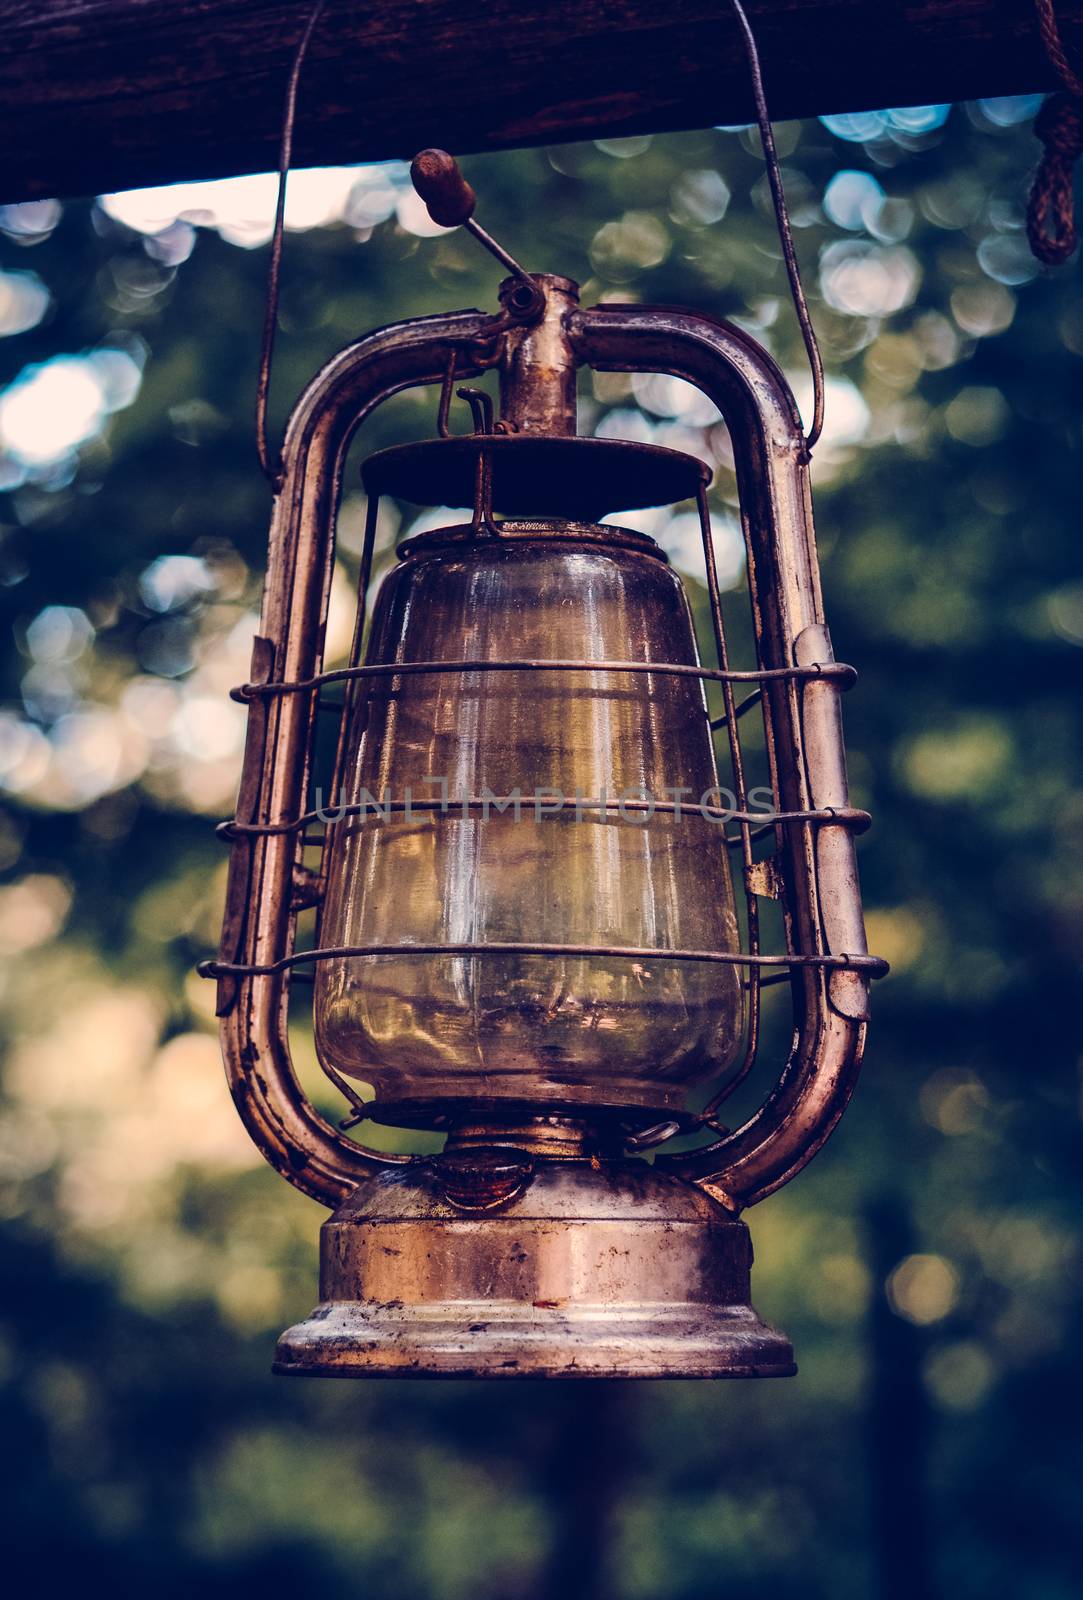 Vintage Oil Lamp WIth Retro Filter by mrdoomits